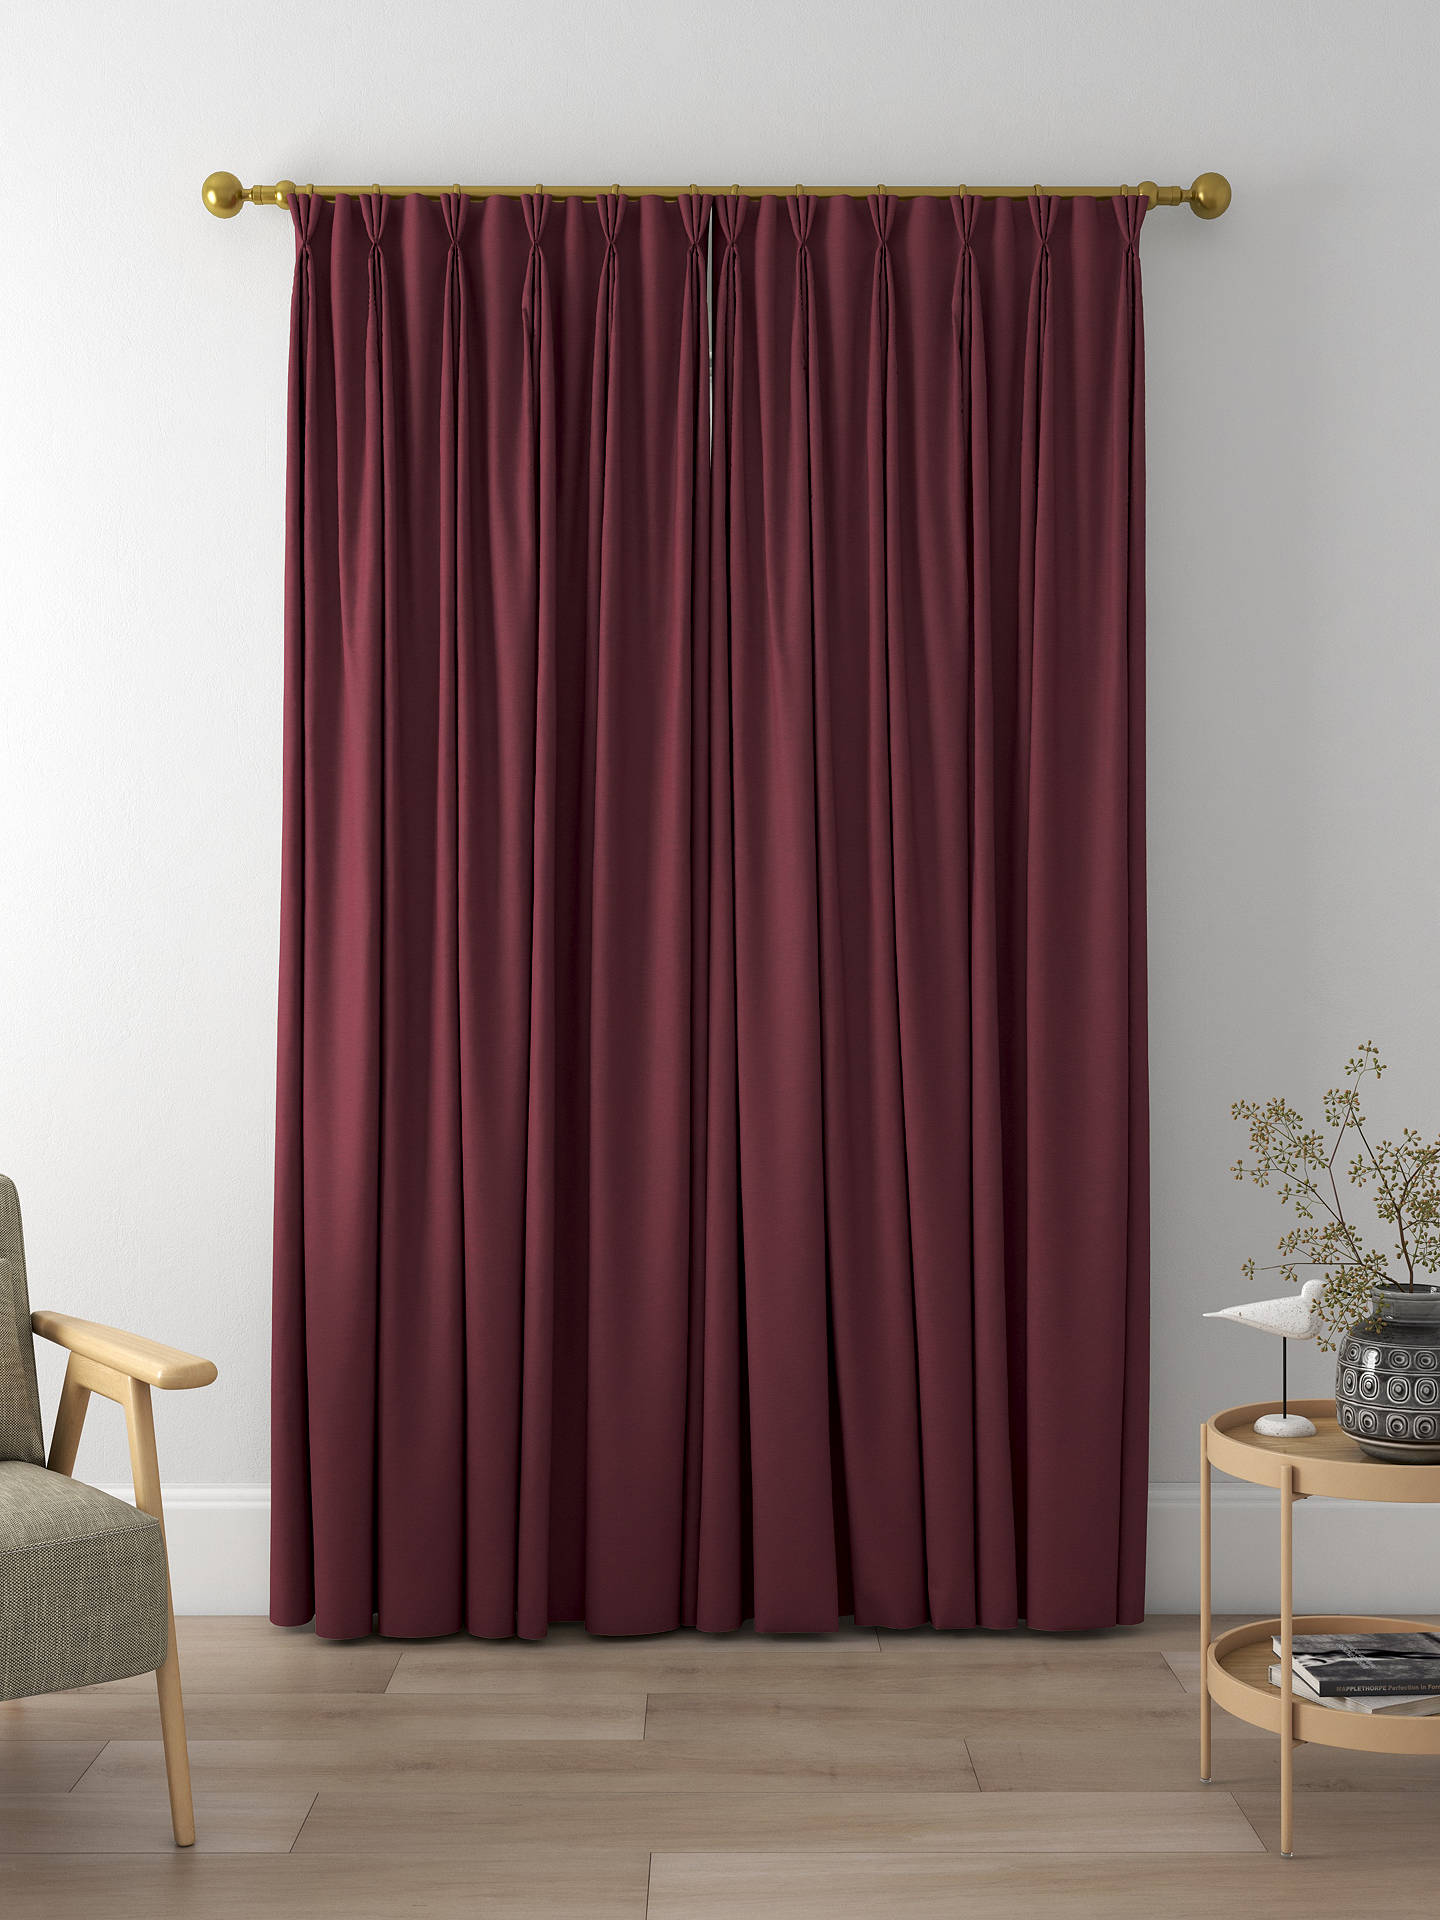 Laura Ashley Swanson Made to Measure Curtains, Dark Cranberry